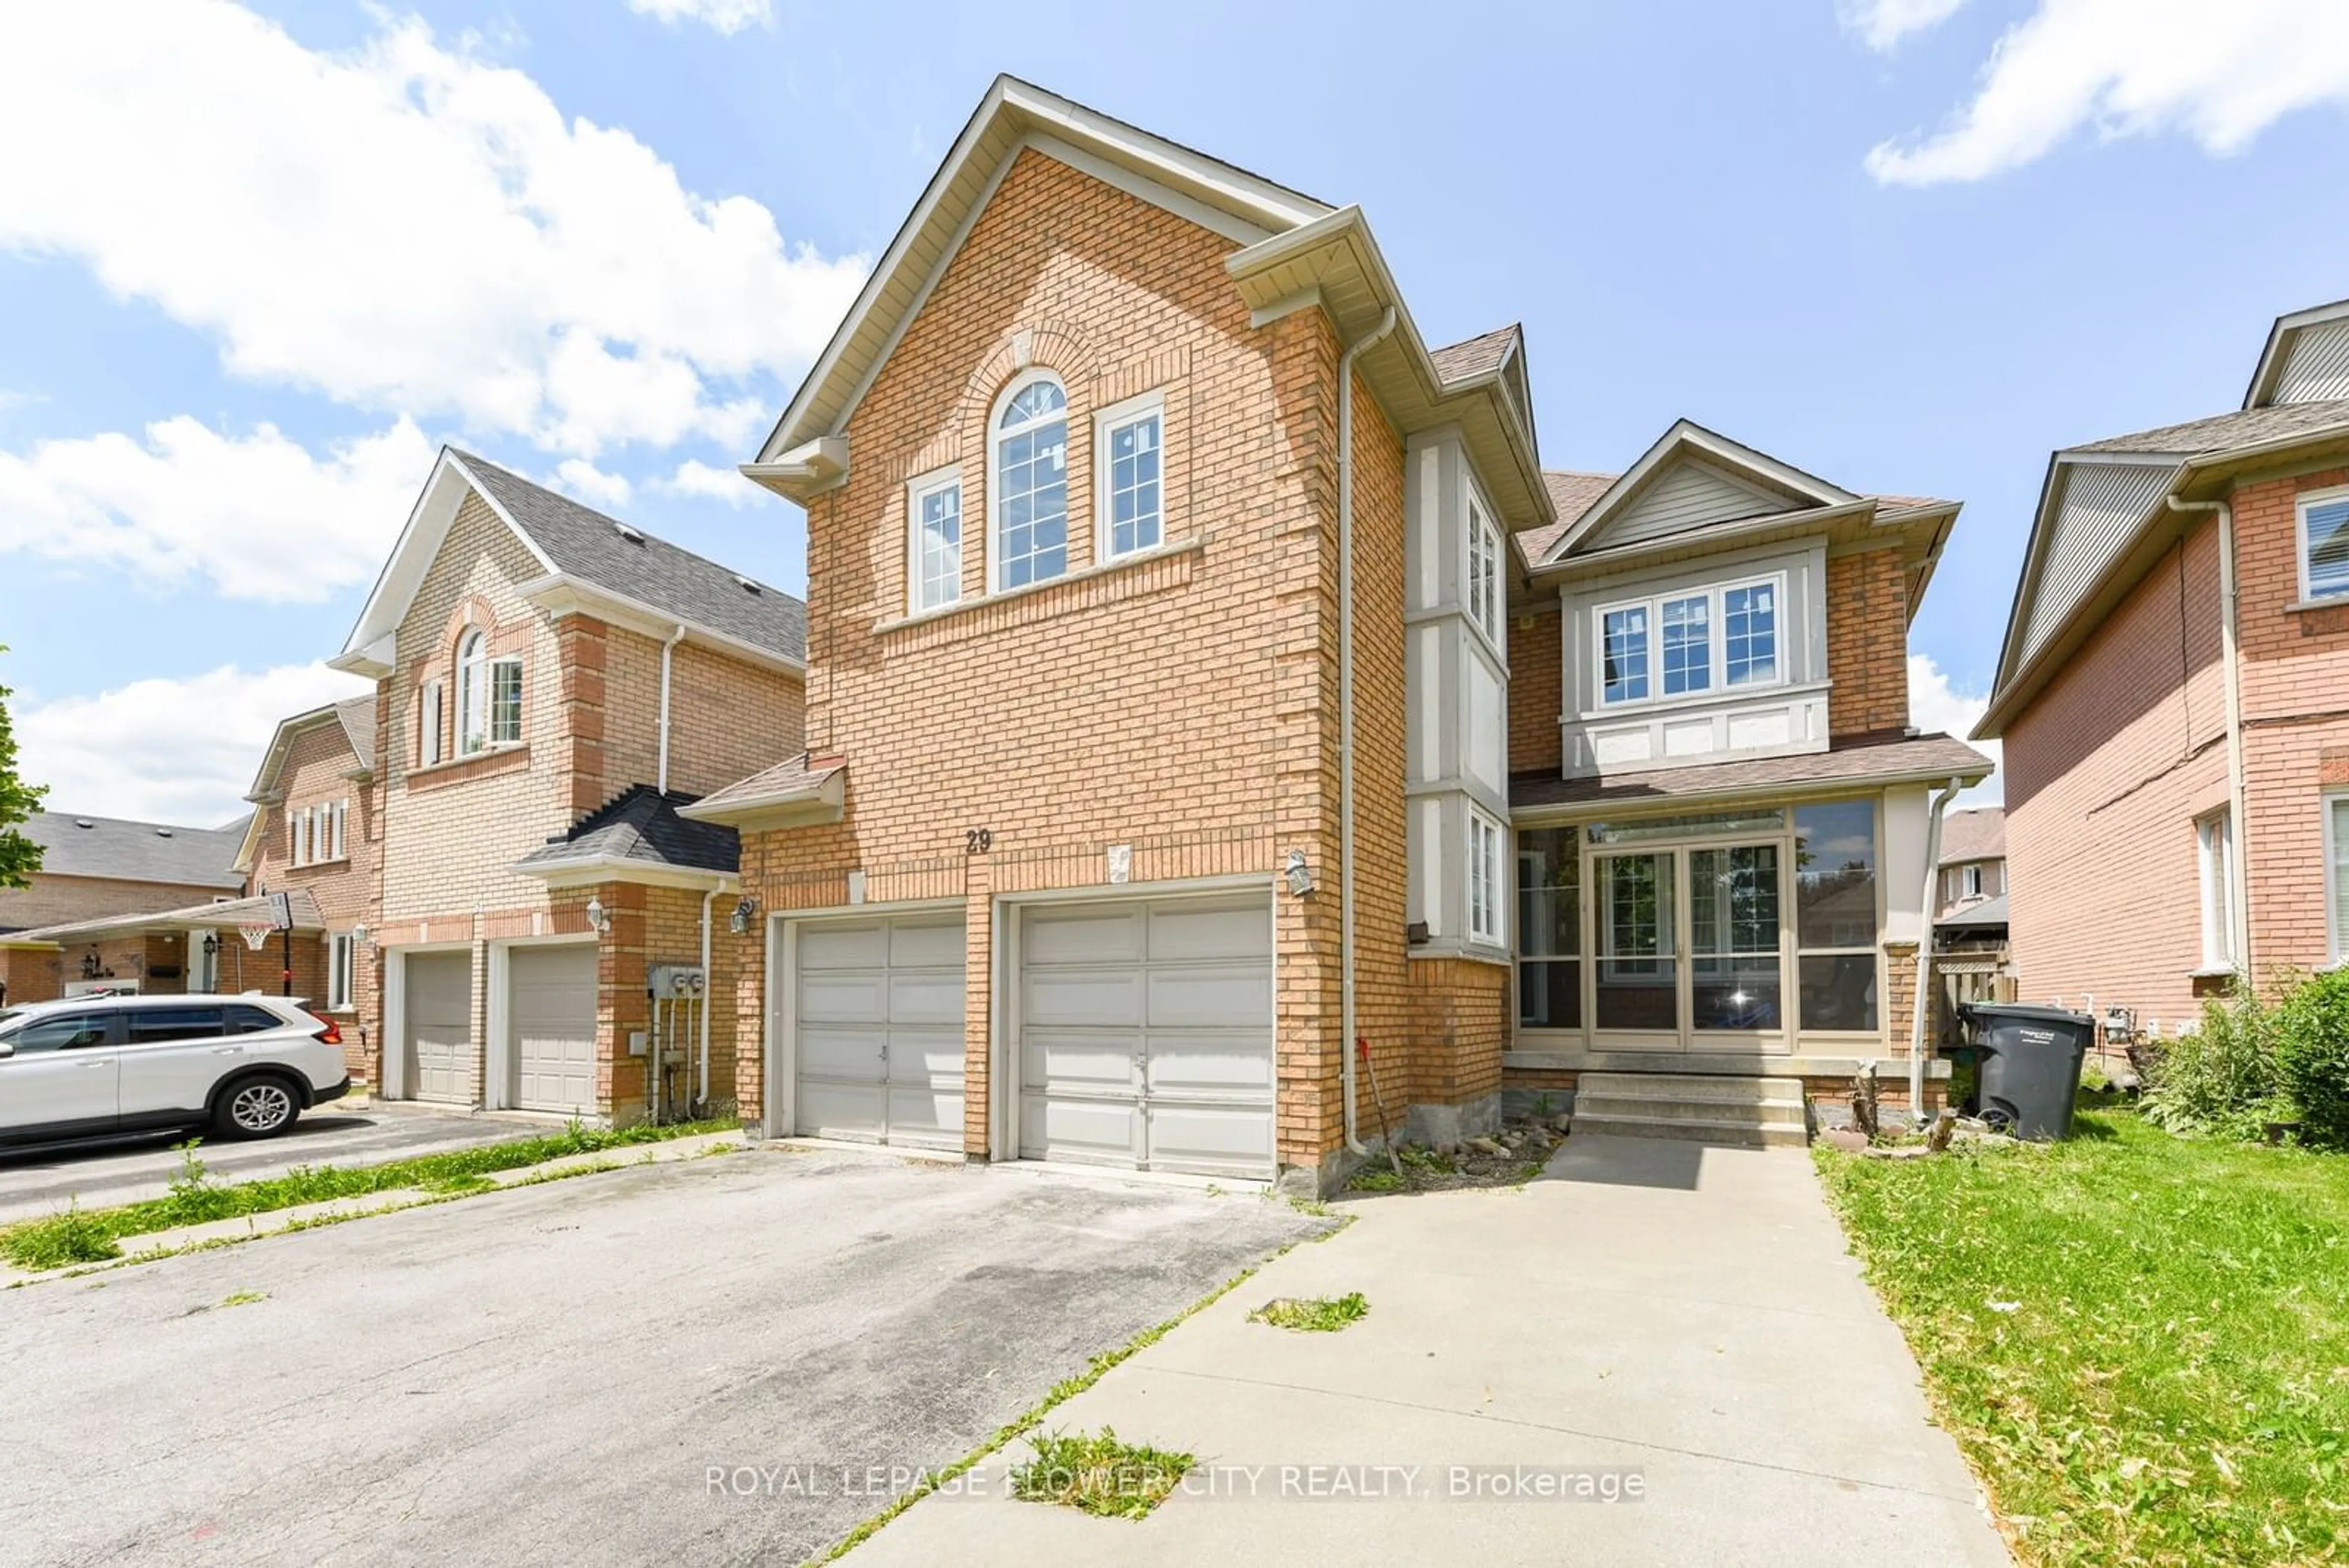 Home with brick exterior material for 29 Rainforest Dr, Brampton Ontario L6R 1B1